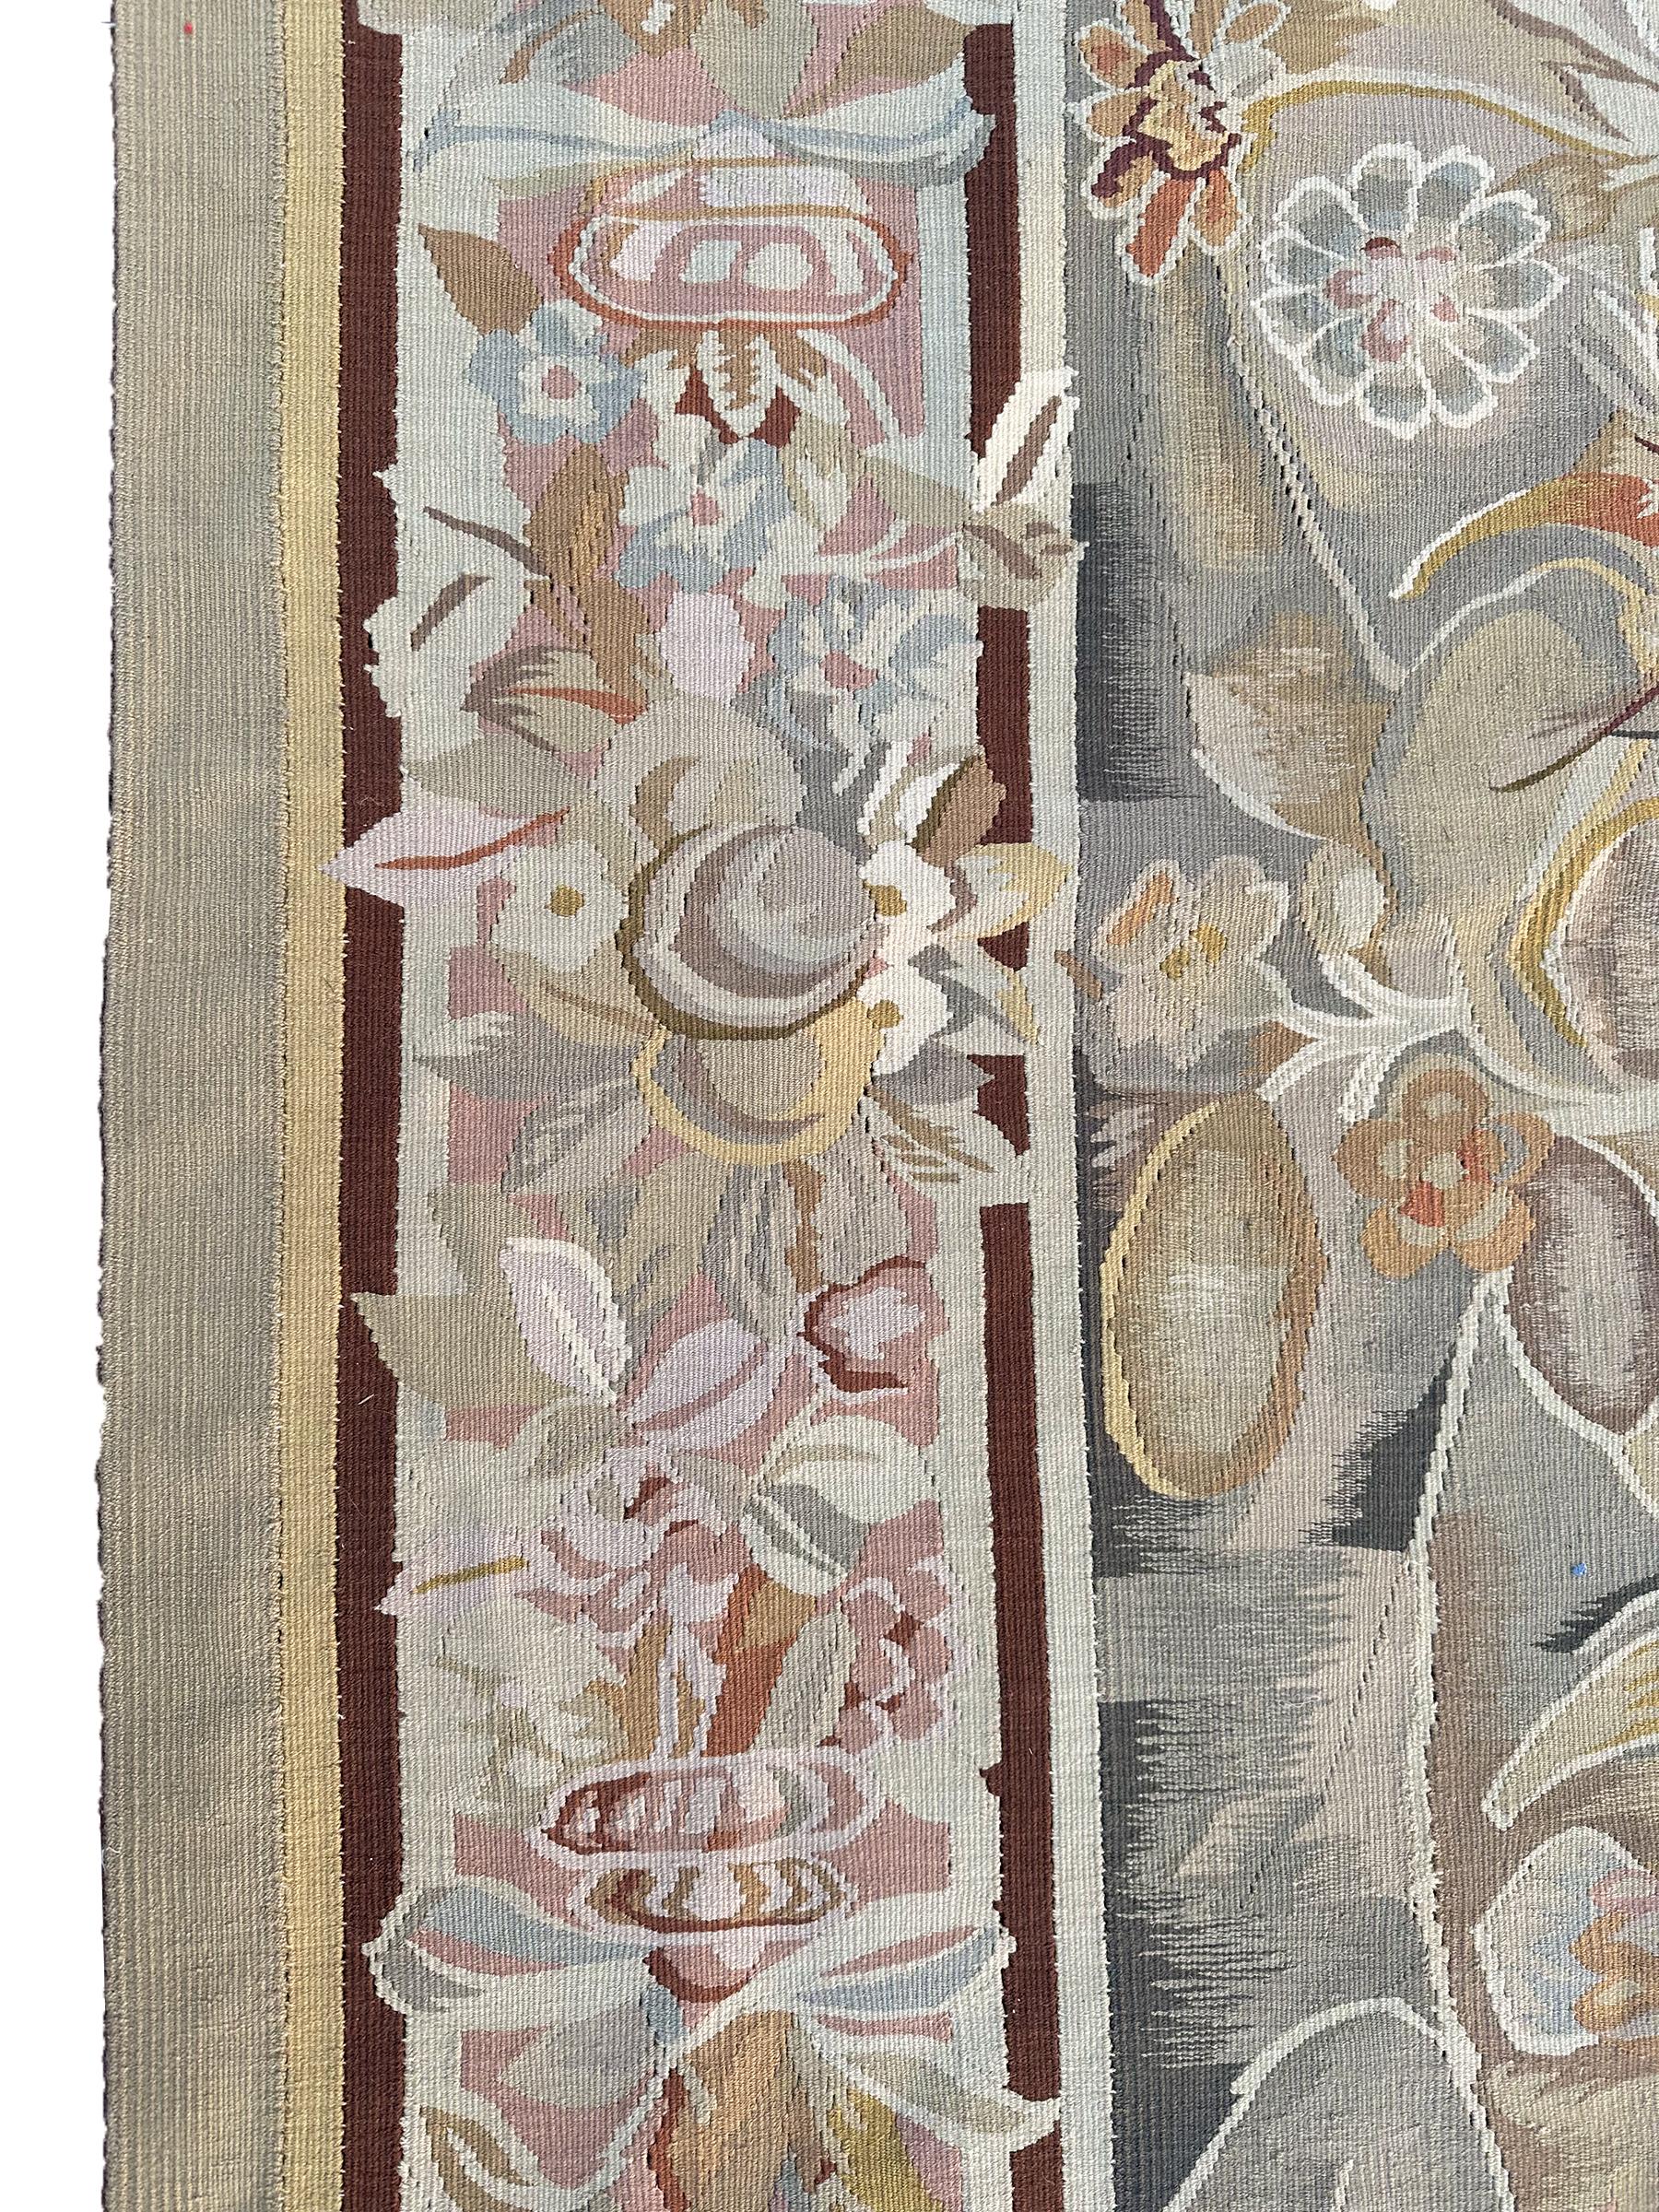 Wool Vintage French Aubusson Tapestry Rug Art Nouveau Bold 9x9 Square 256cm x 285cm For Sale